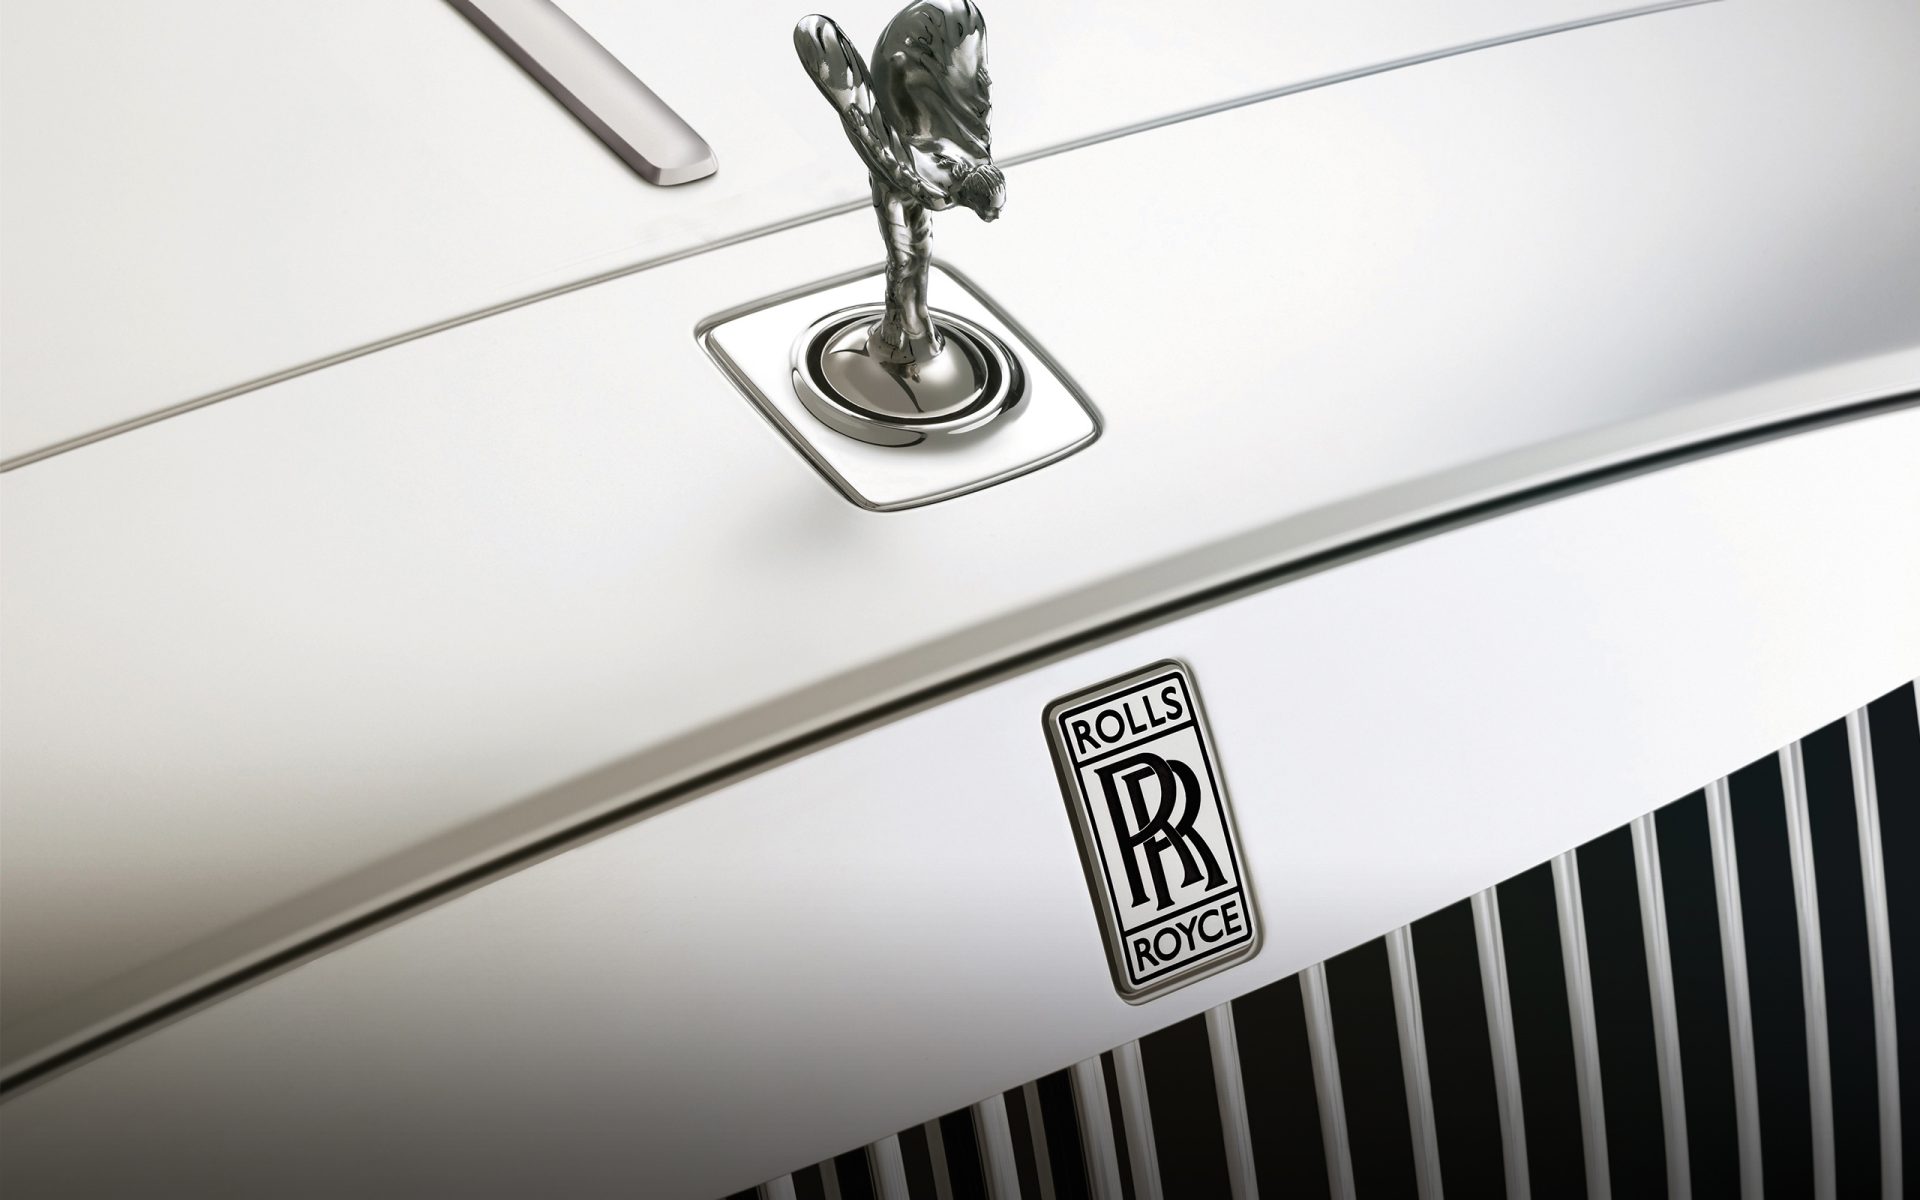 Rolls-Royce joins the BMW Group.